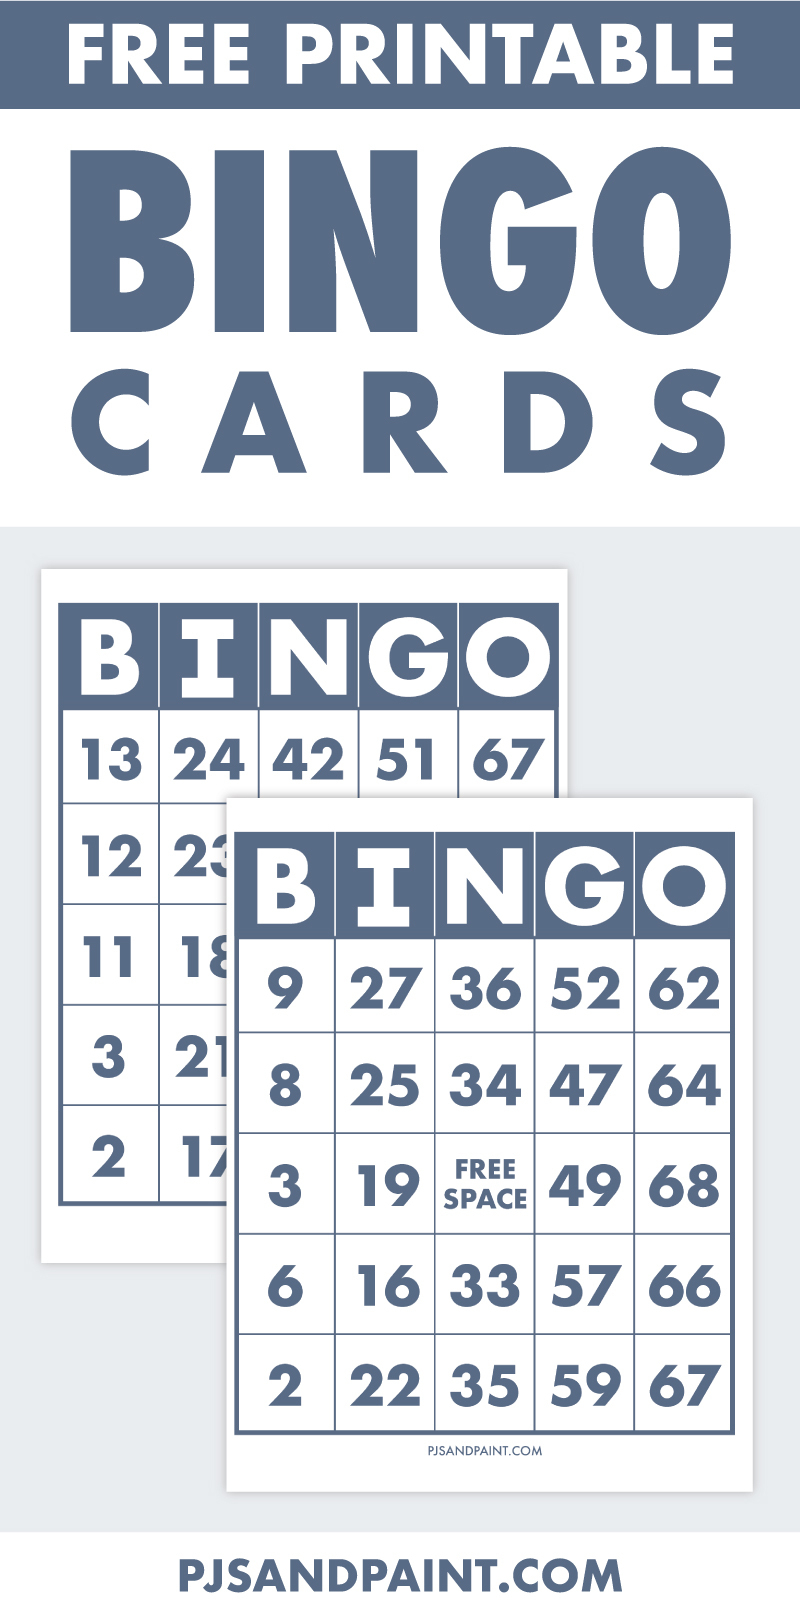 Free Printable Bingo Cards - Pjs And Paint - Printable Bingo Cards For Large Groups Free